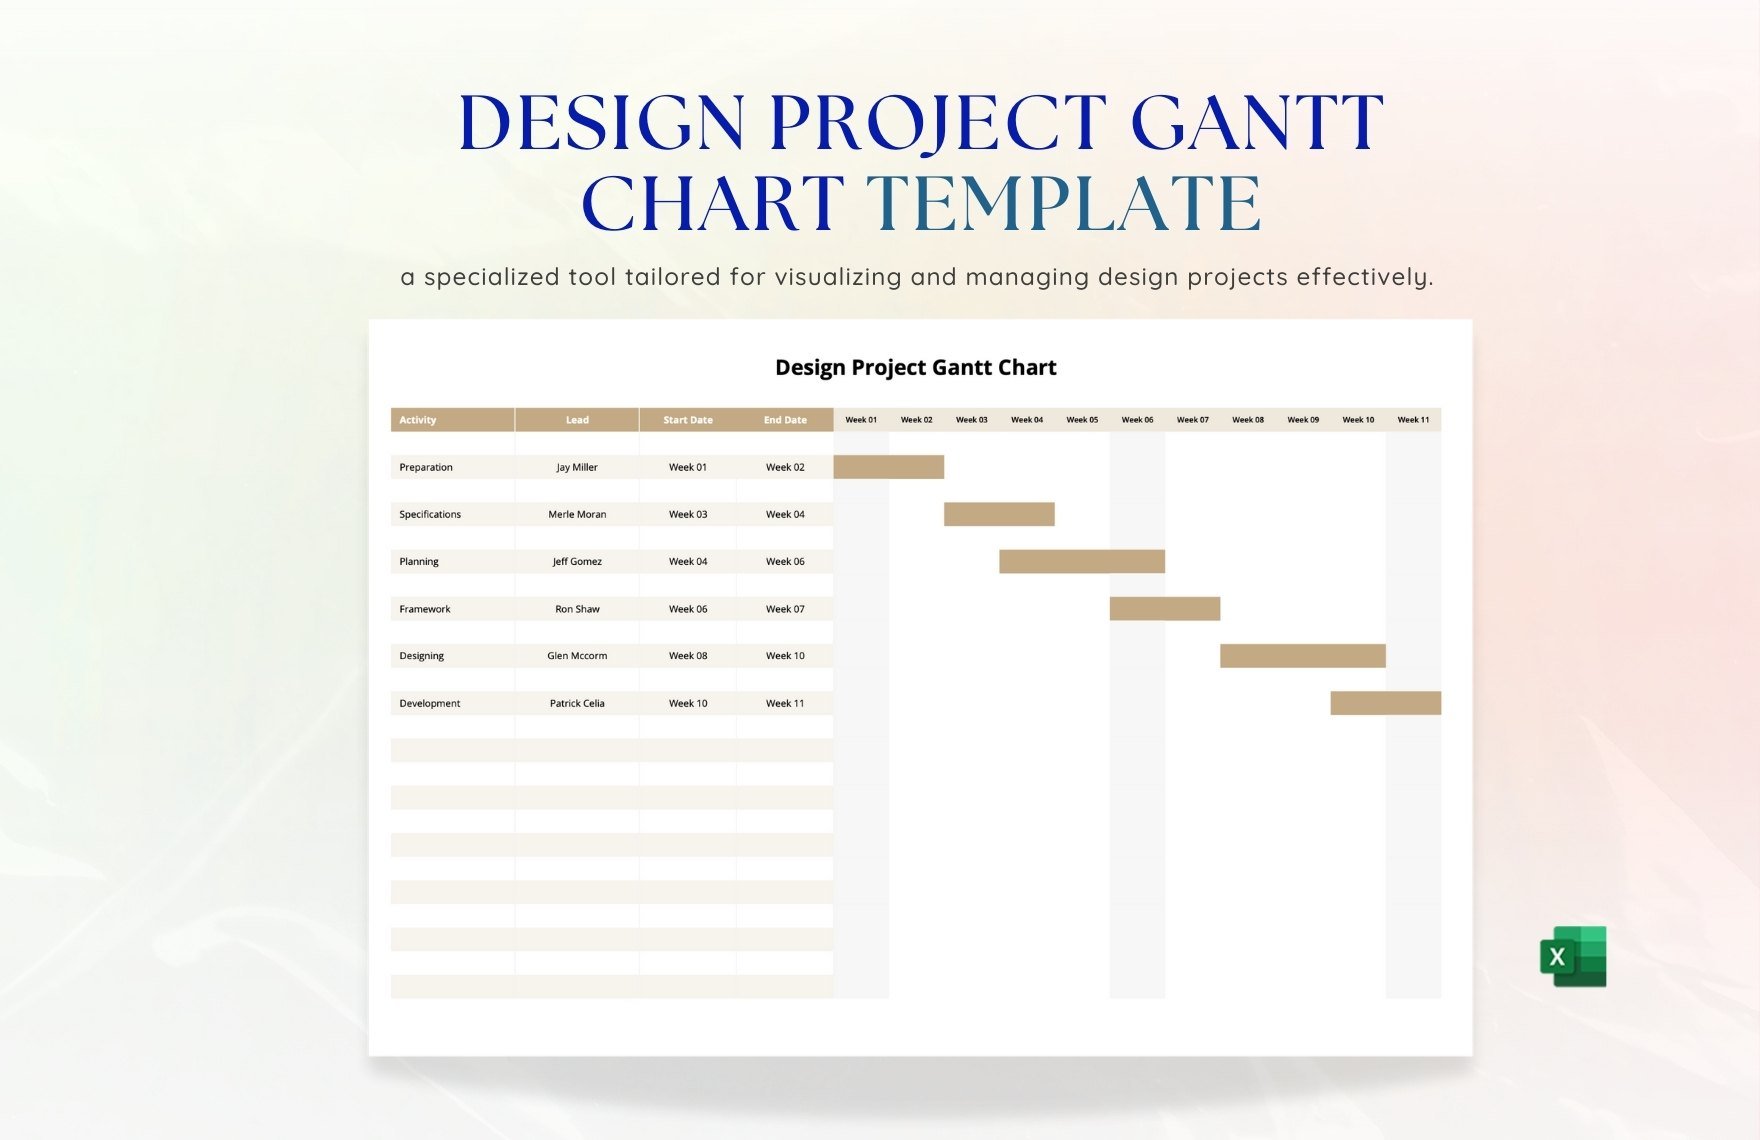 Design Project Gantt Chart Template in Excel